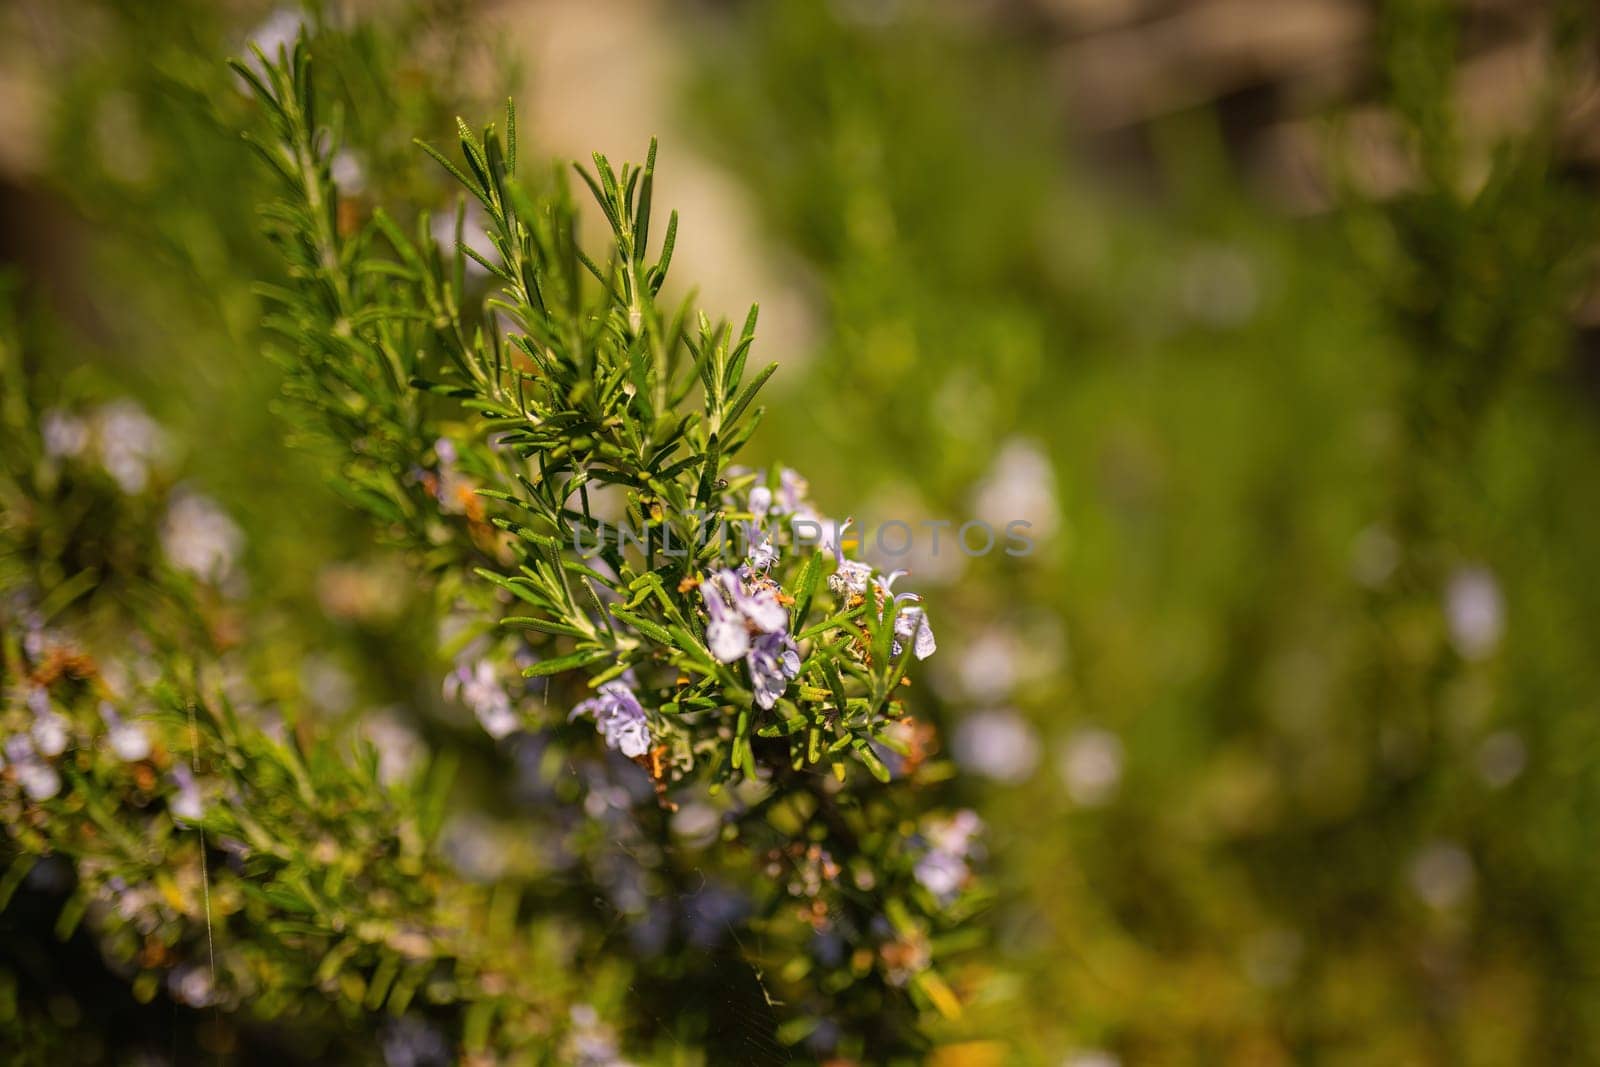 Close Up of rosemary Plant With Small Blue Flowers by pippocarlot